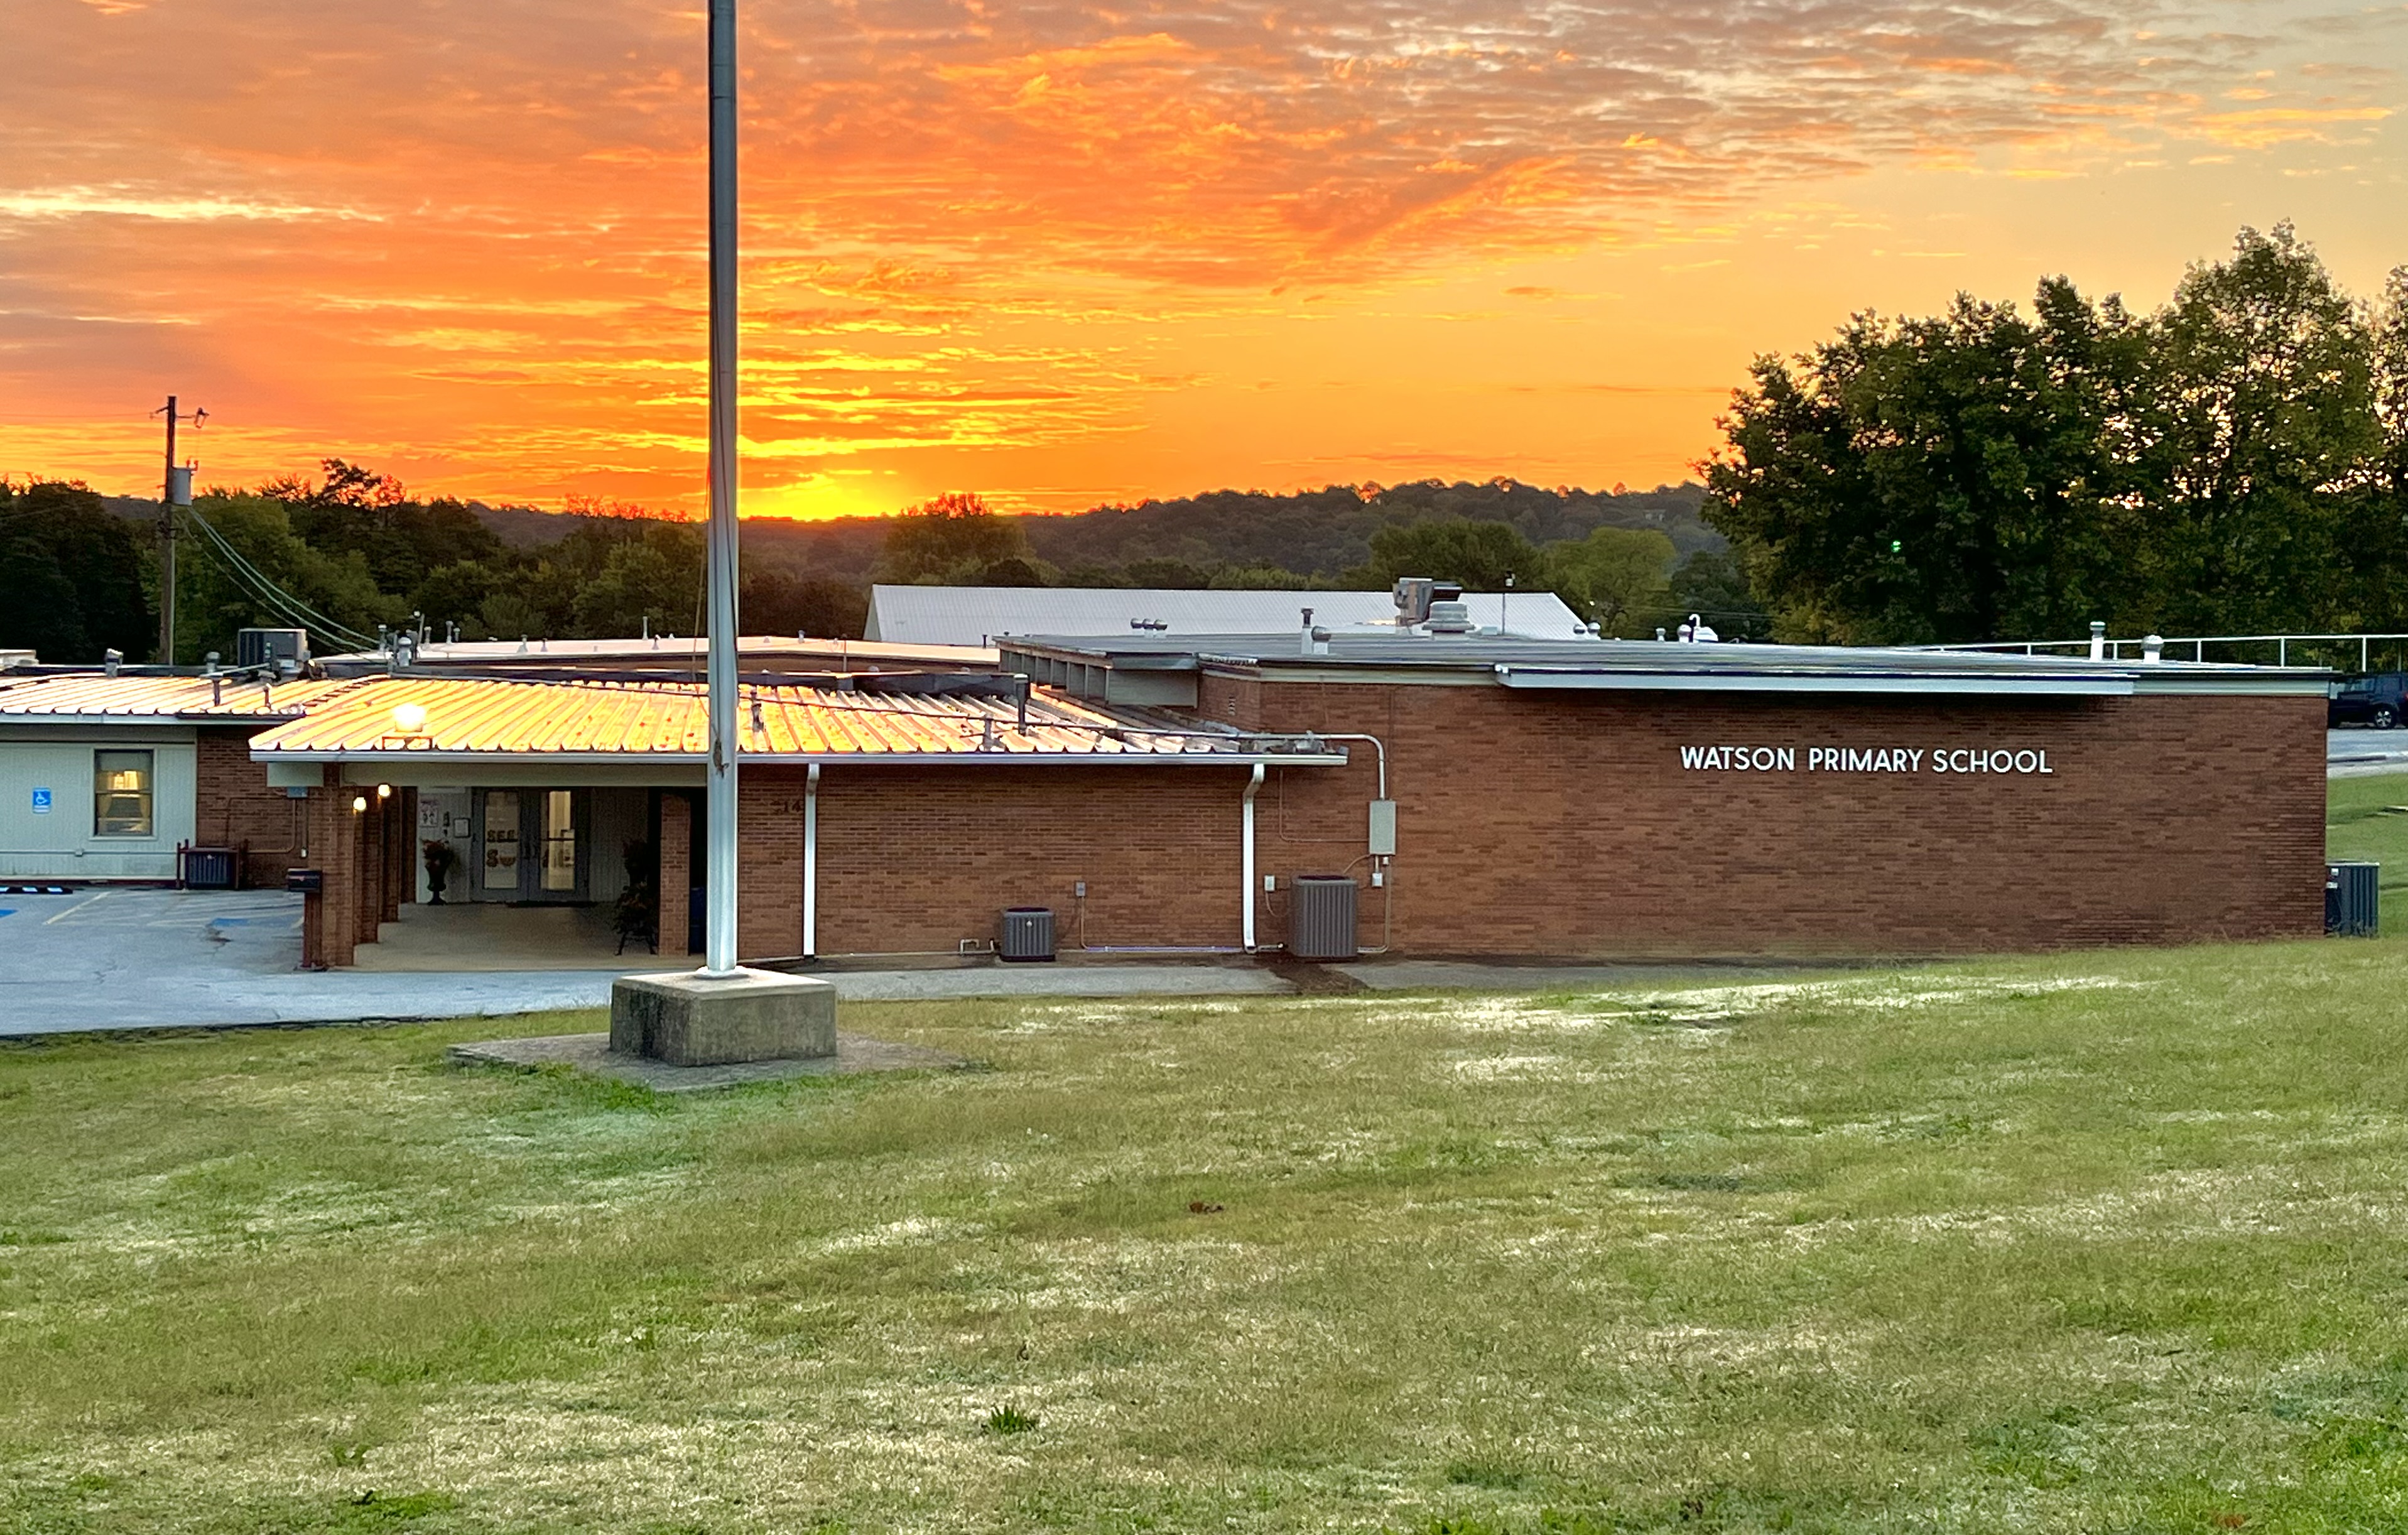 School with sunrise behind it